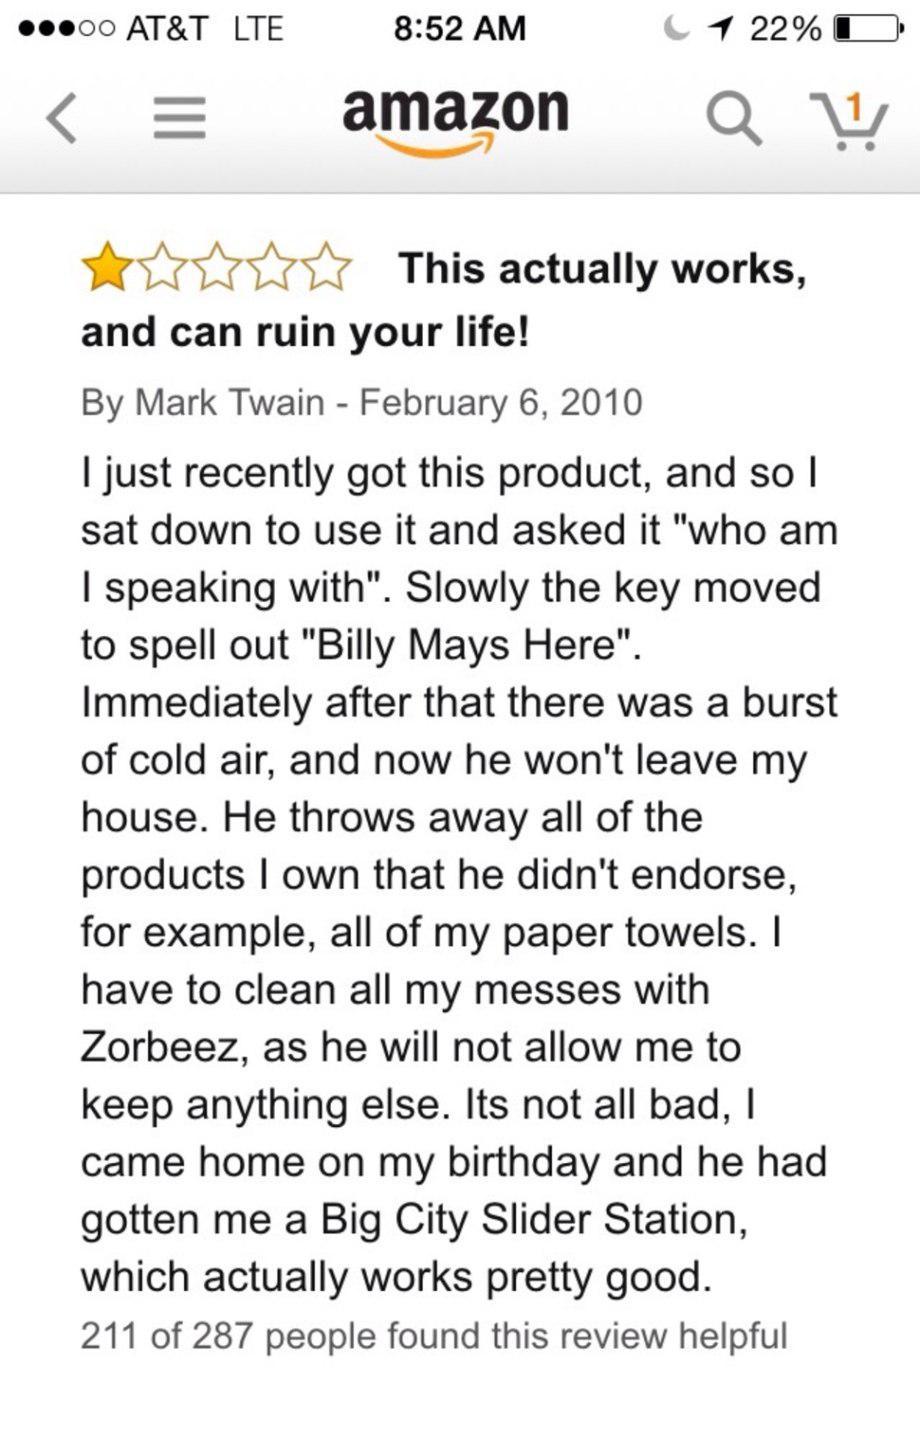 amazon reviews - funny 1 star reviews - ...00 At&T Lte